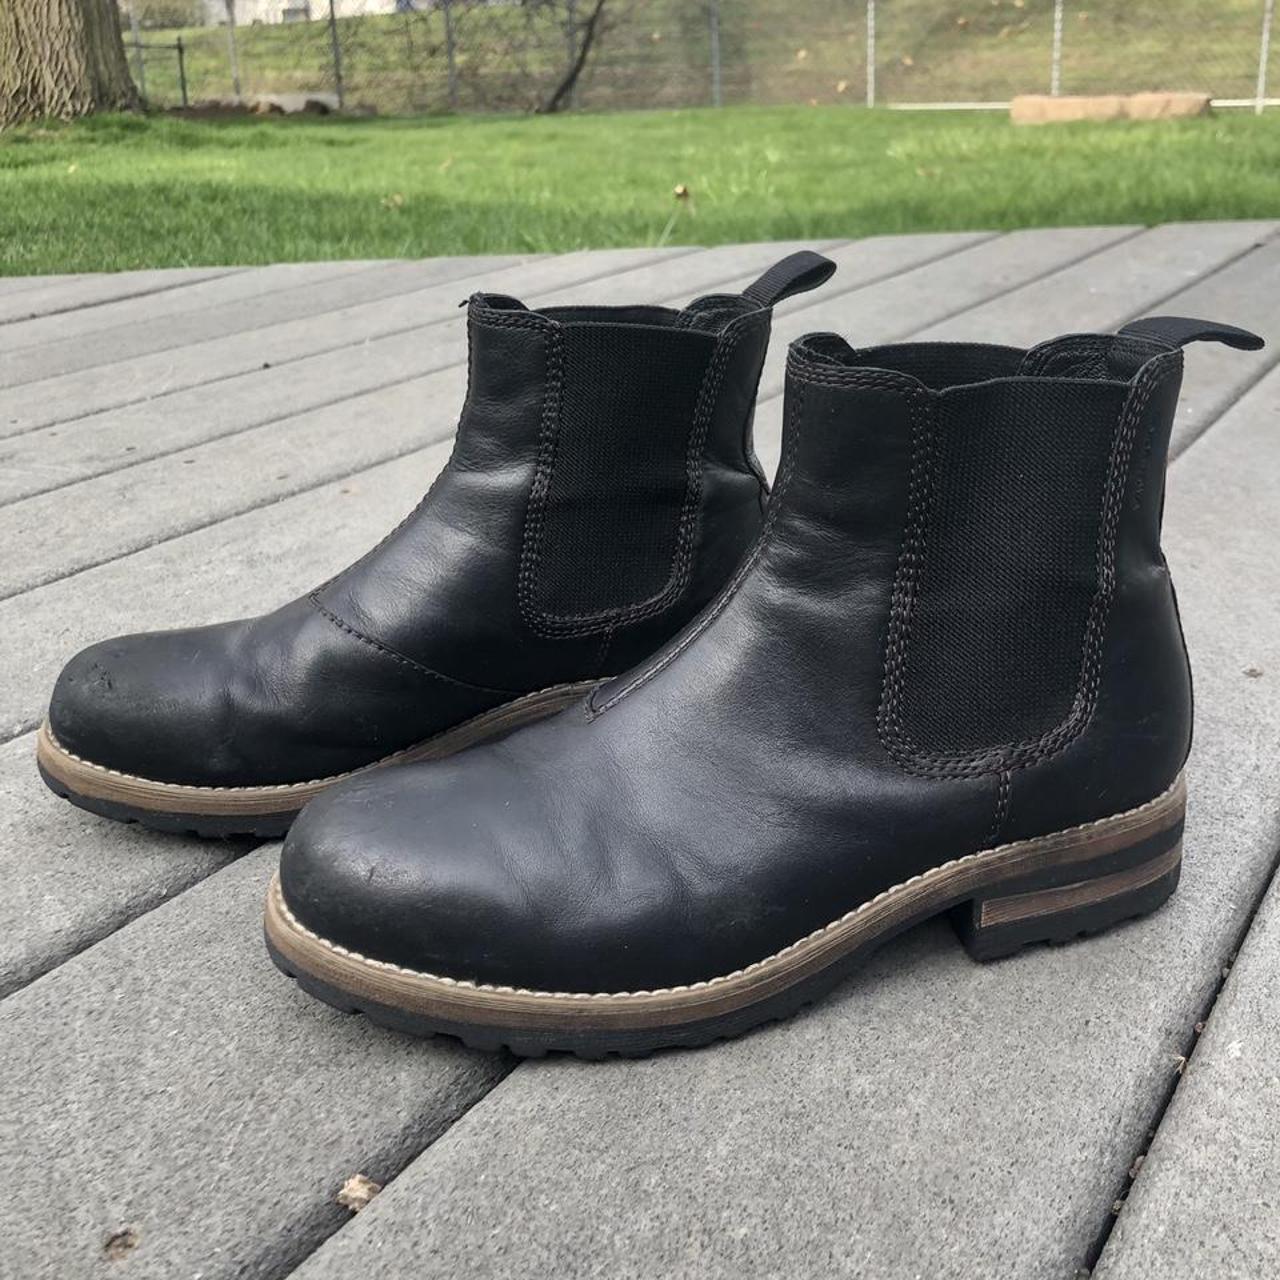 Women's Black and Brown Boots | Depop